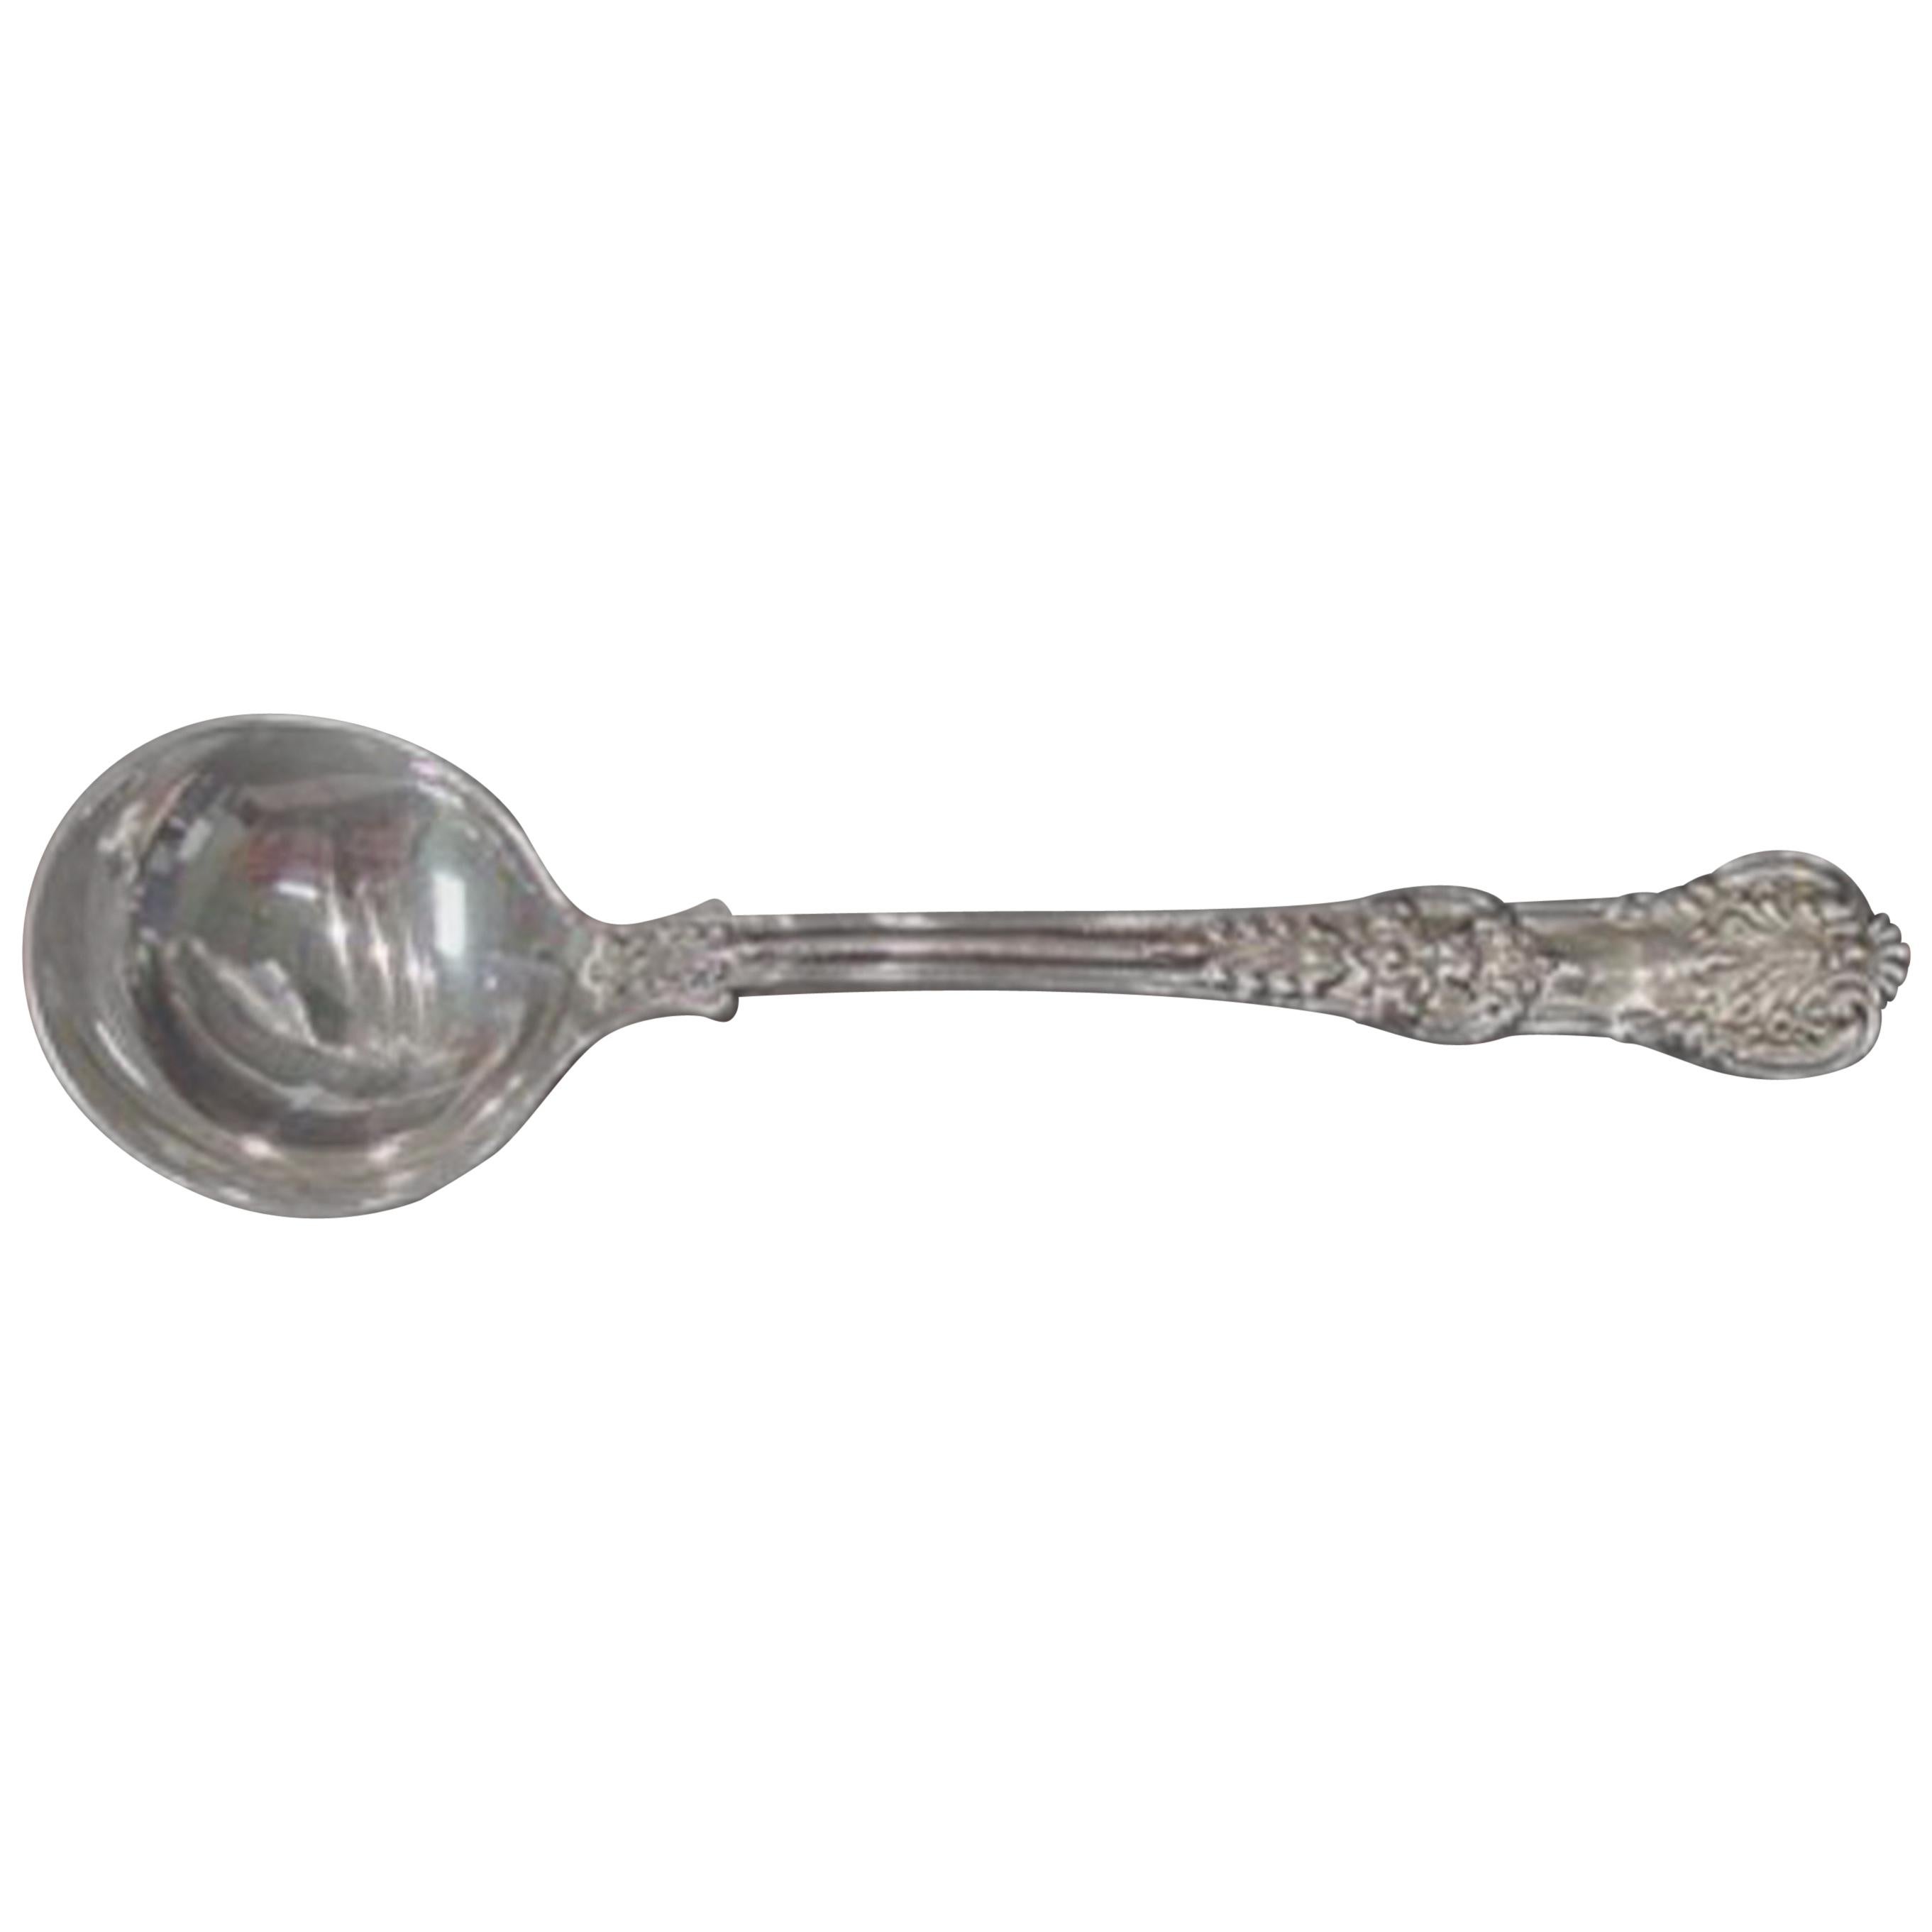 English King by Tiffany & Co. Sterling Silver Bouillon Soup Spoon